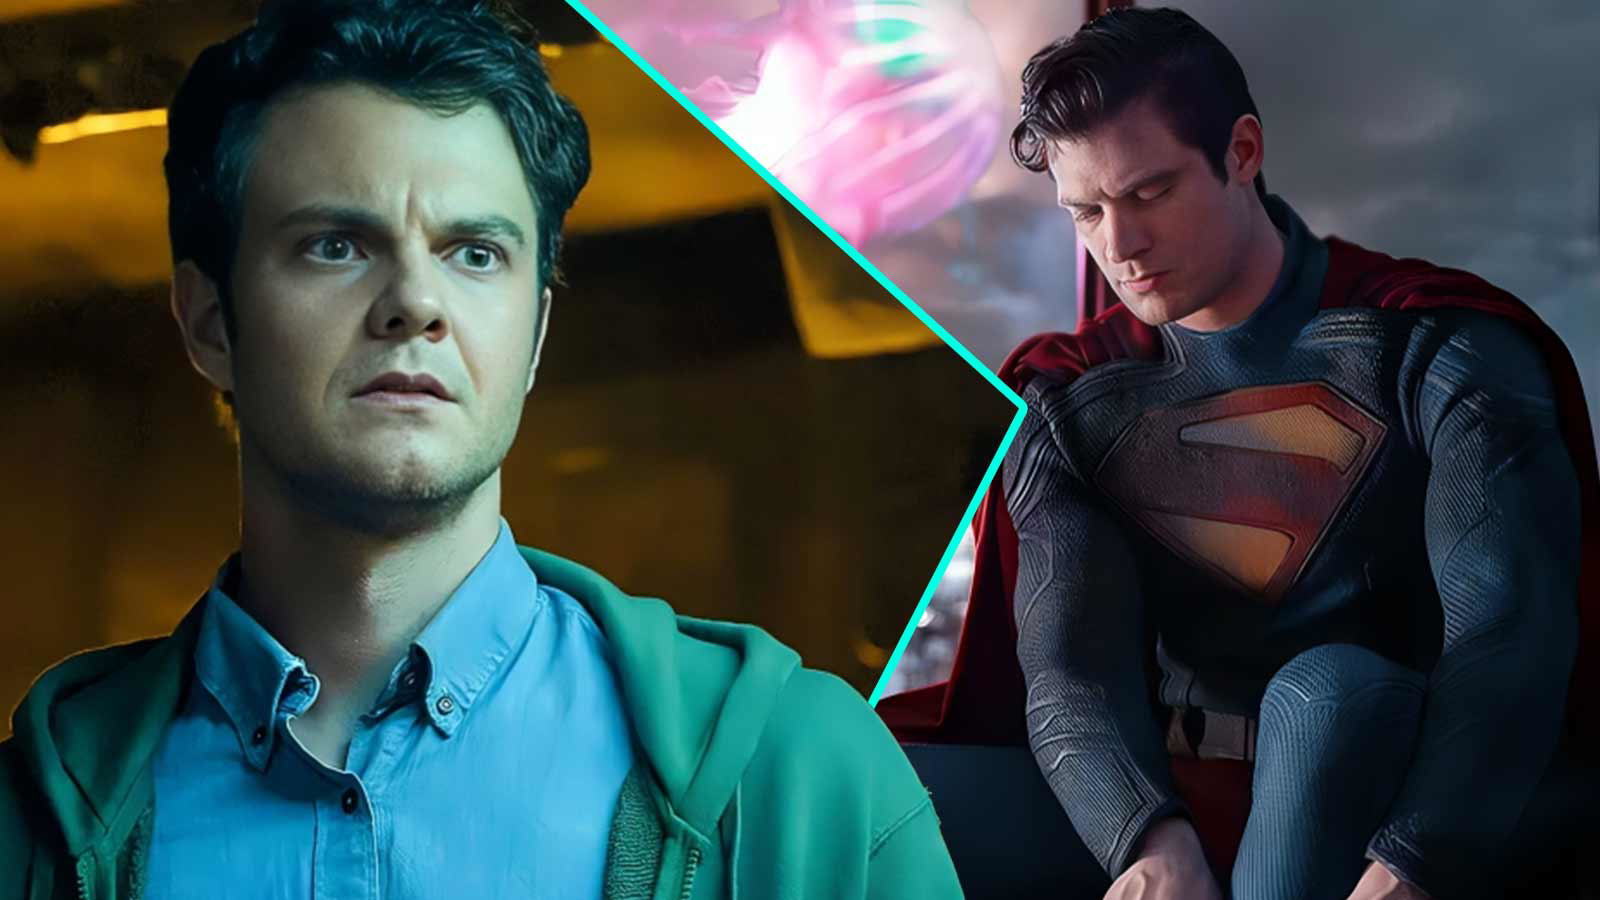 “It’s probably gonna be you”: ‘The Boys’ Star Jack Quaid Proved He Has James Gunn’s Eye For Casting After Predicting David Corenswet’s Future as Superman Years Ago